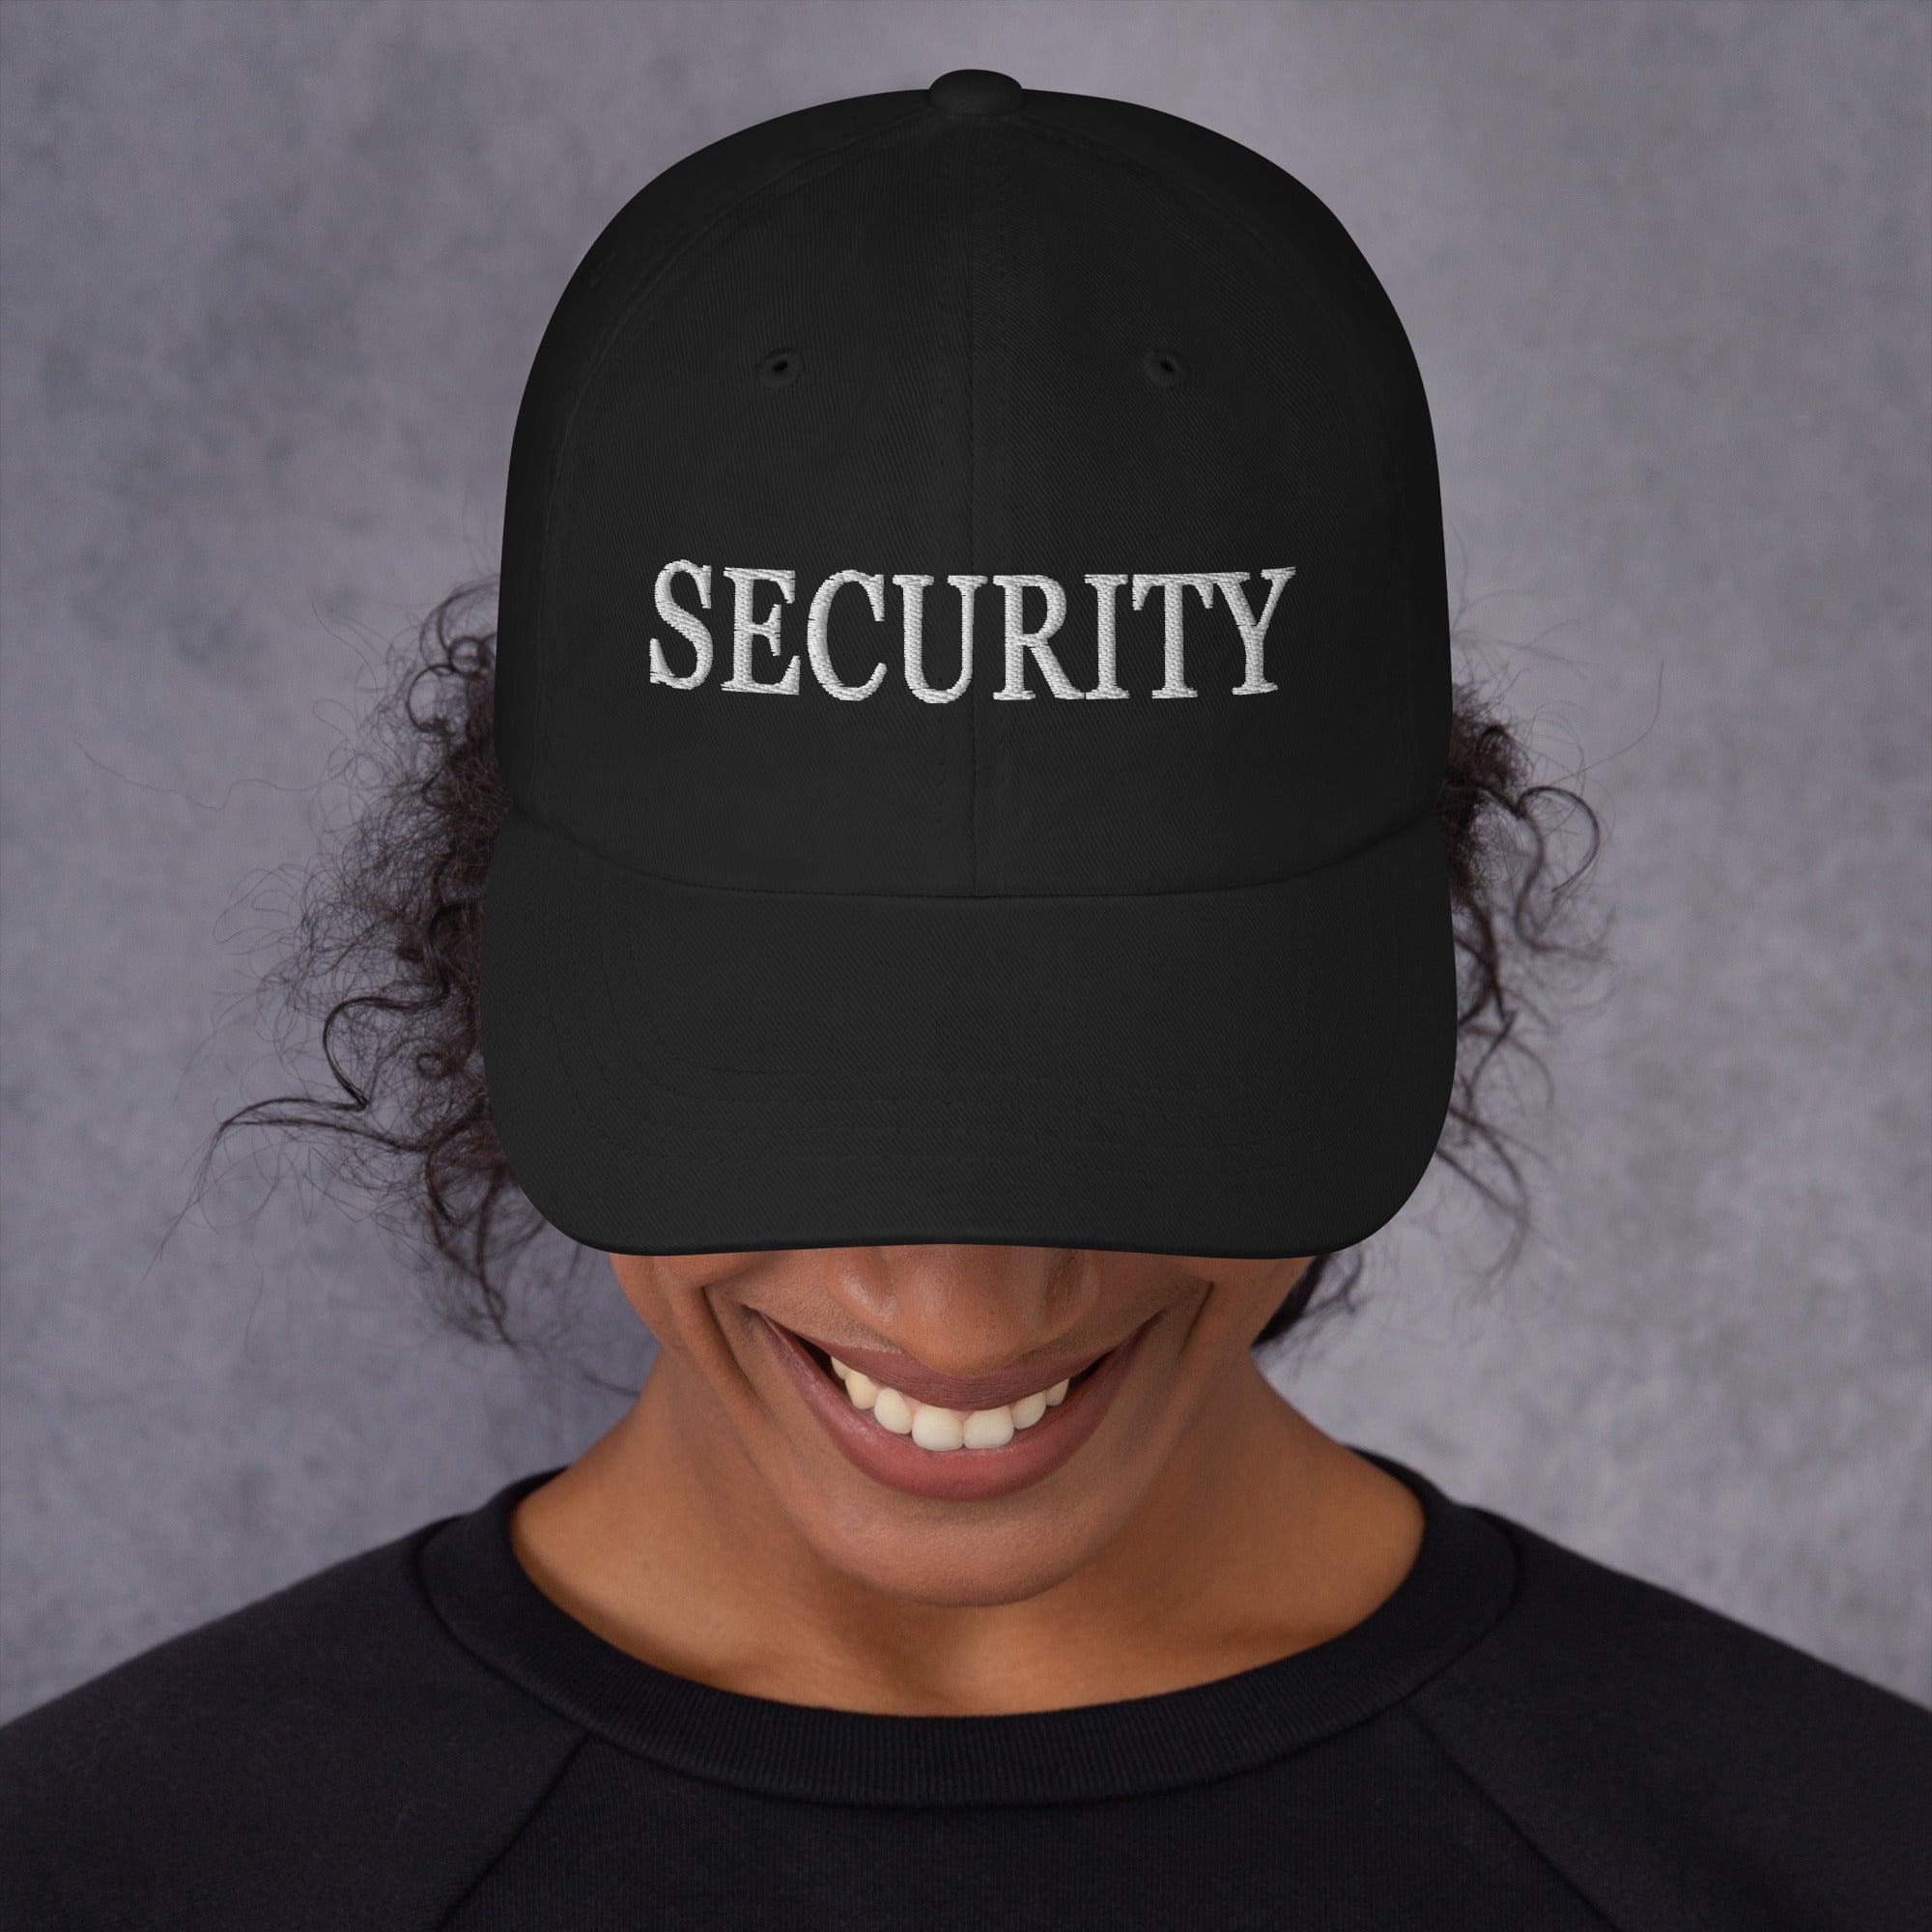 Security Embroidered Baseball Cap FNAF Cosplay Five Nights at Freddy's Dad hat - Edge of Life Designs